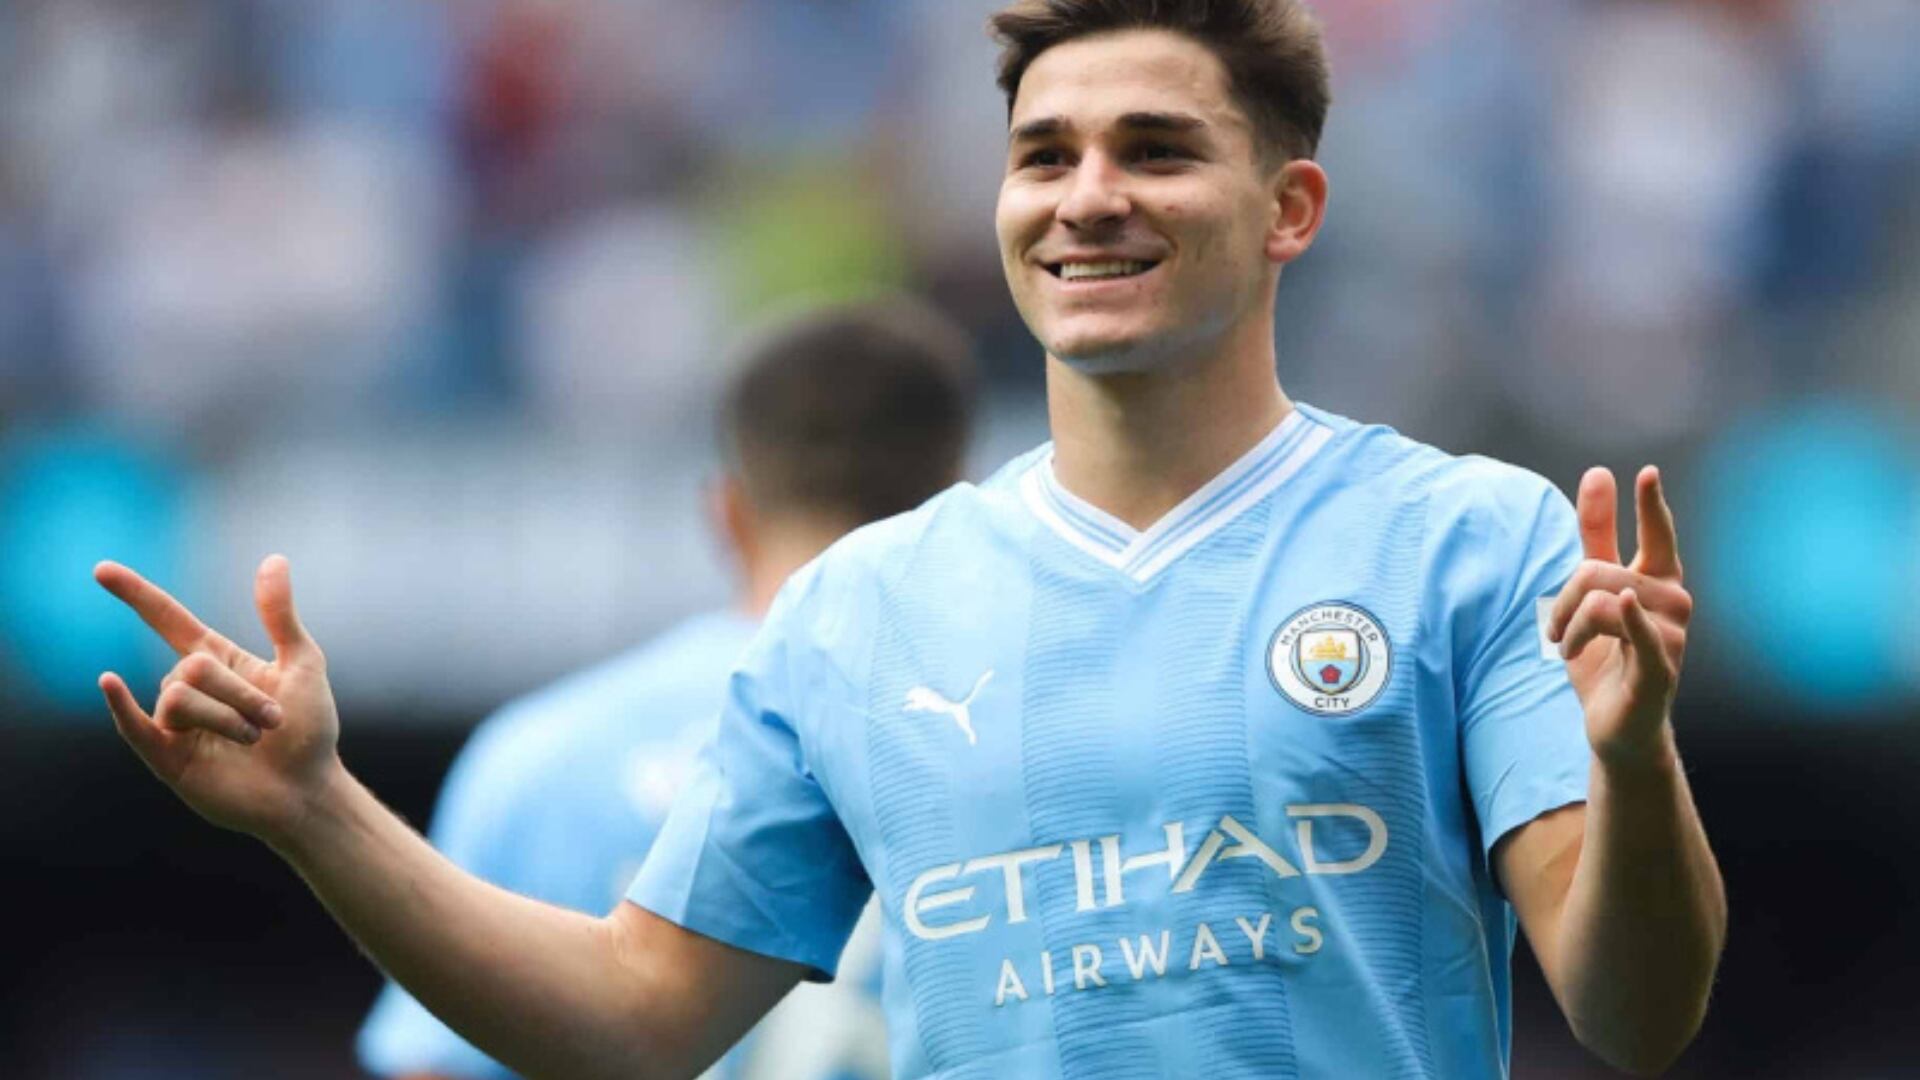 Pep Guardiola’s great news to Julian Alvarez on his role at Manchester City that excite the Argentine fans